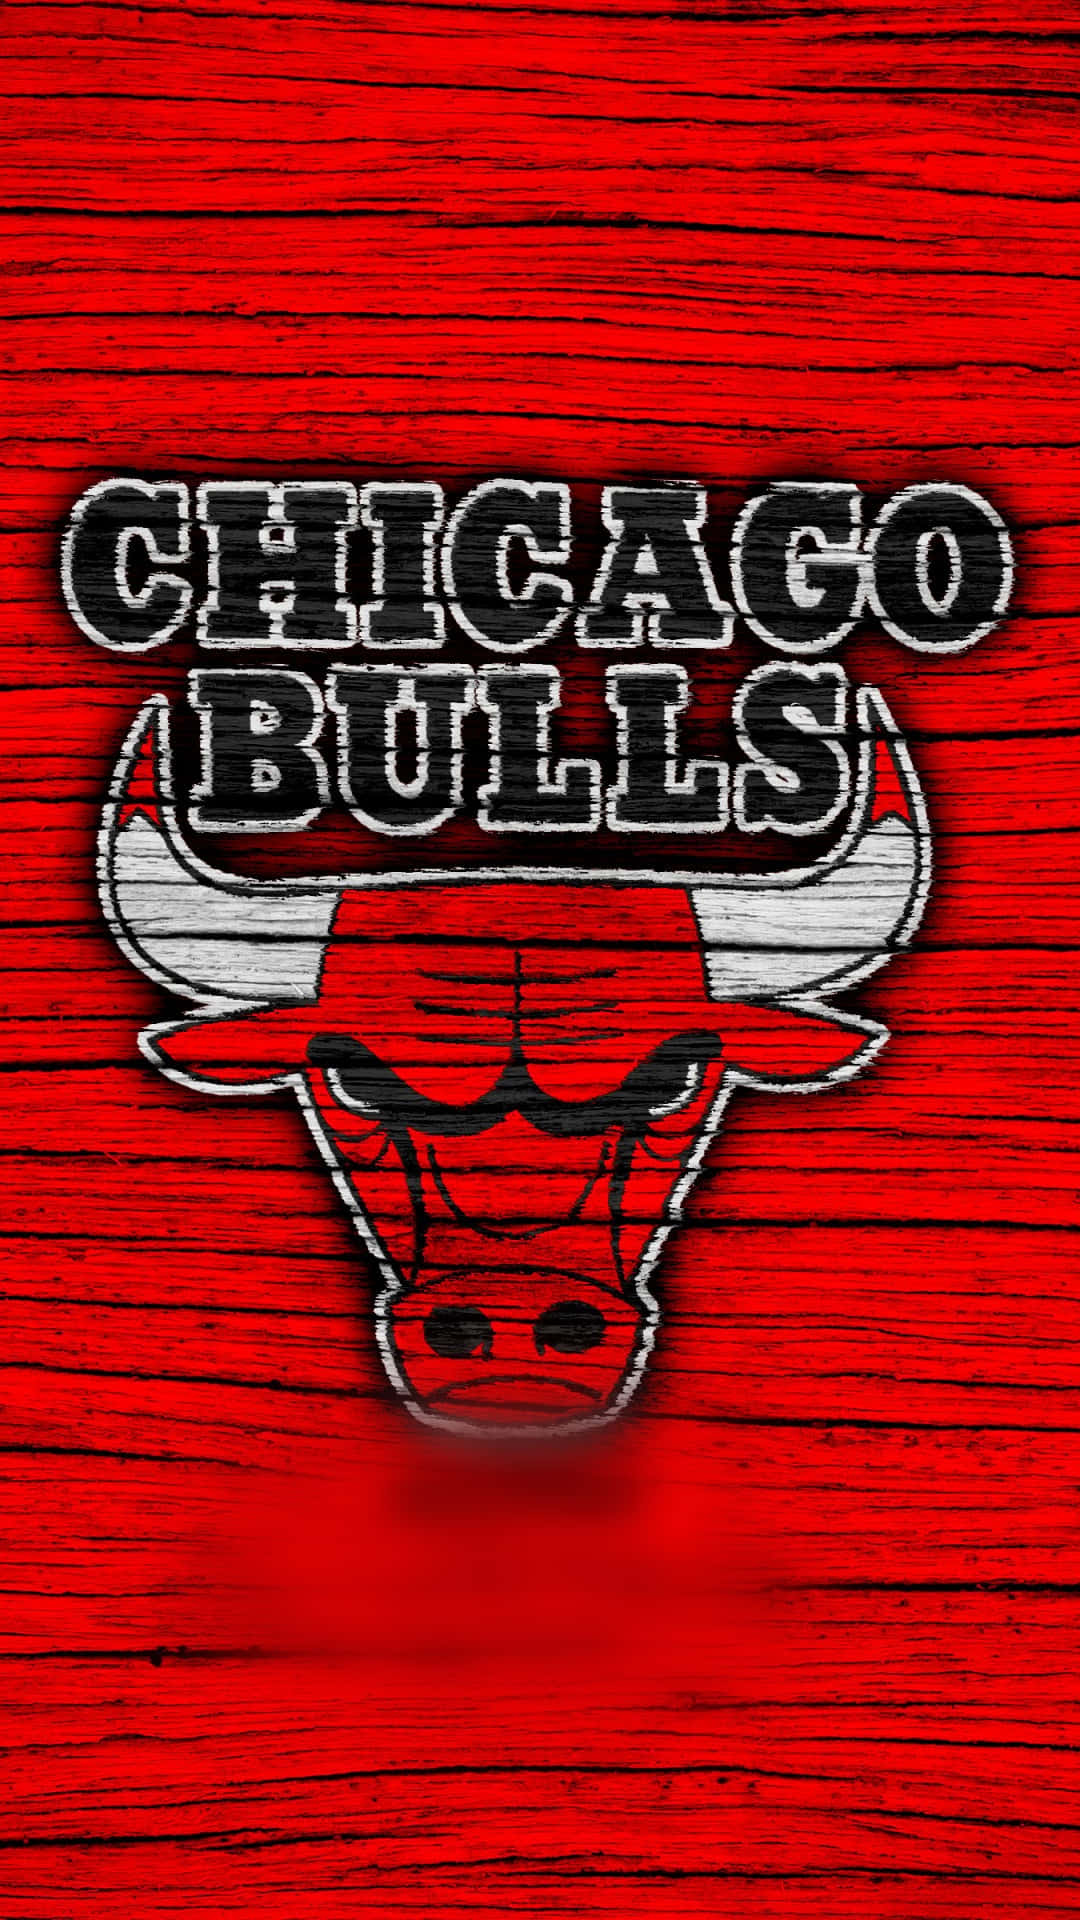 Chicago Bulls On Red Wooden Texture Phone Wallpaper